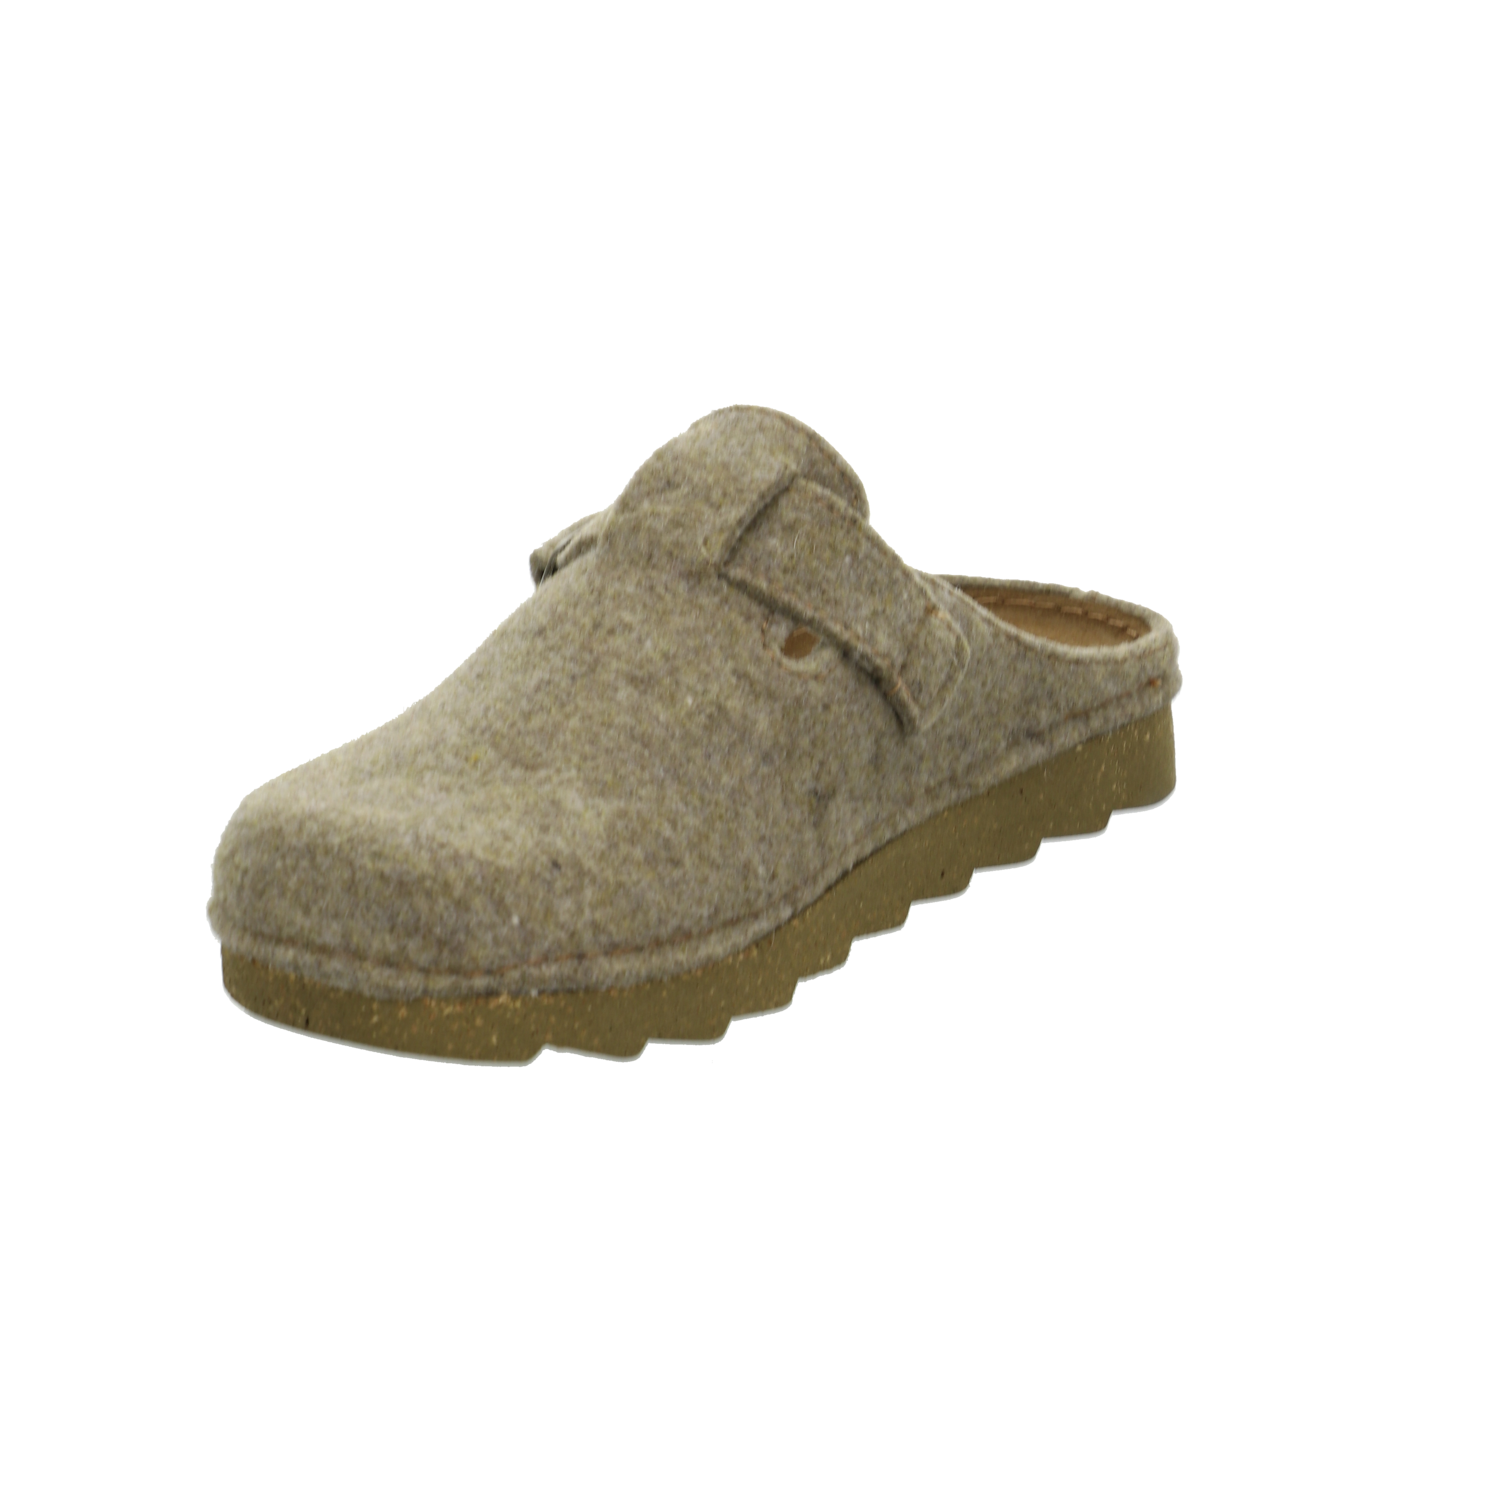 Rohde KG Pantoffel taupe